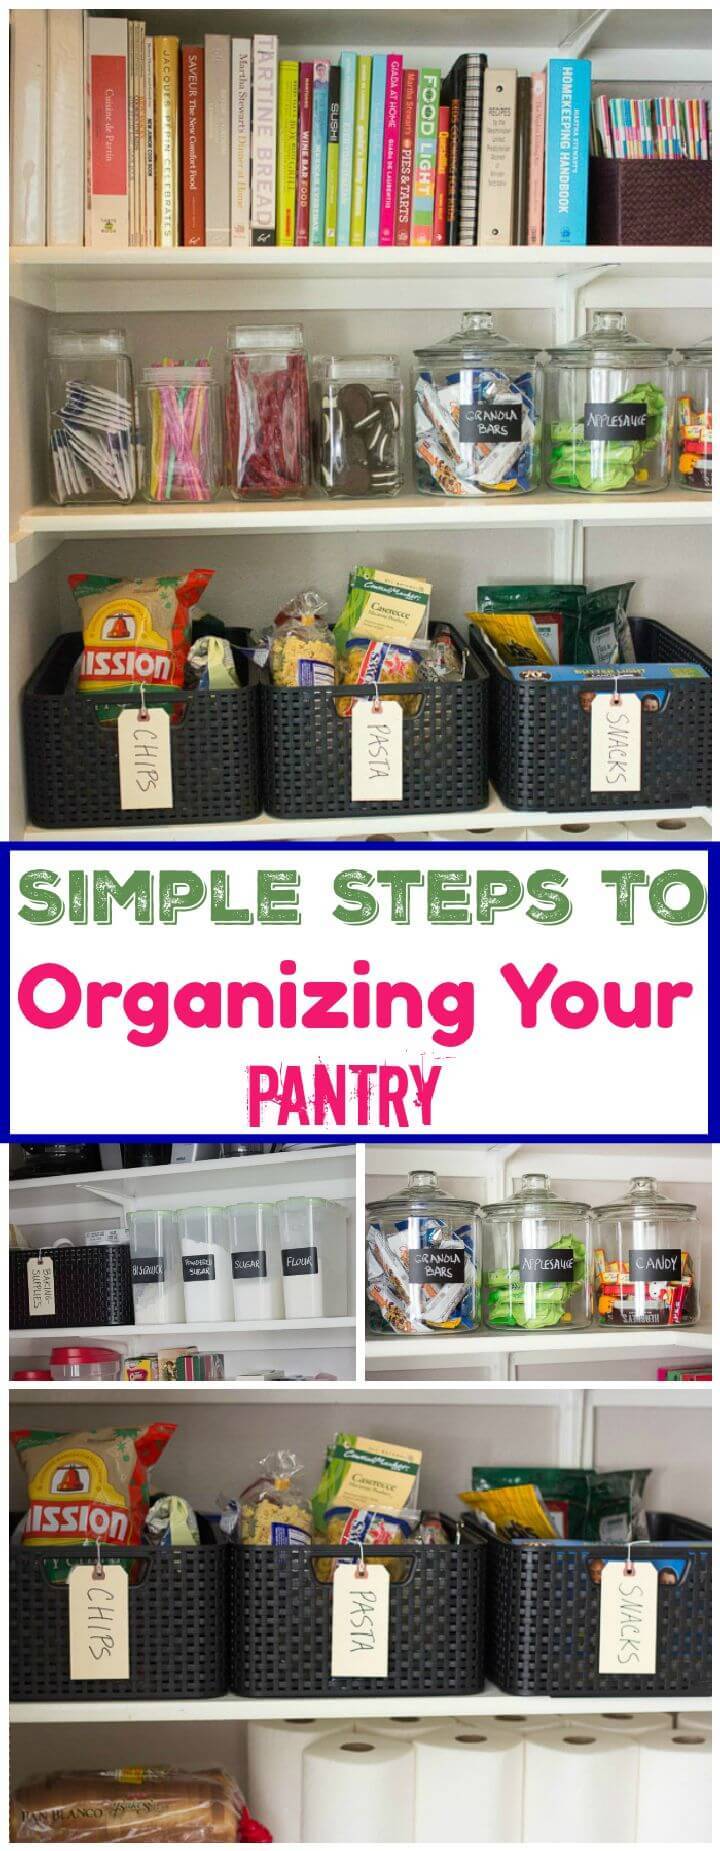 Simple Steps to Organizing Your Pantry